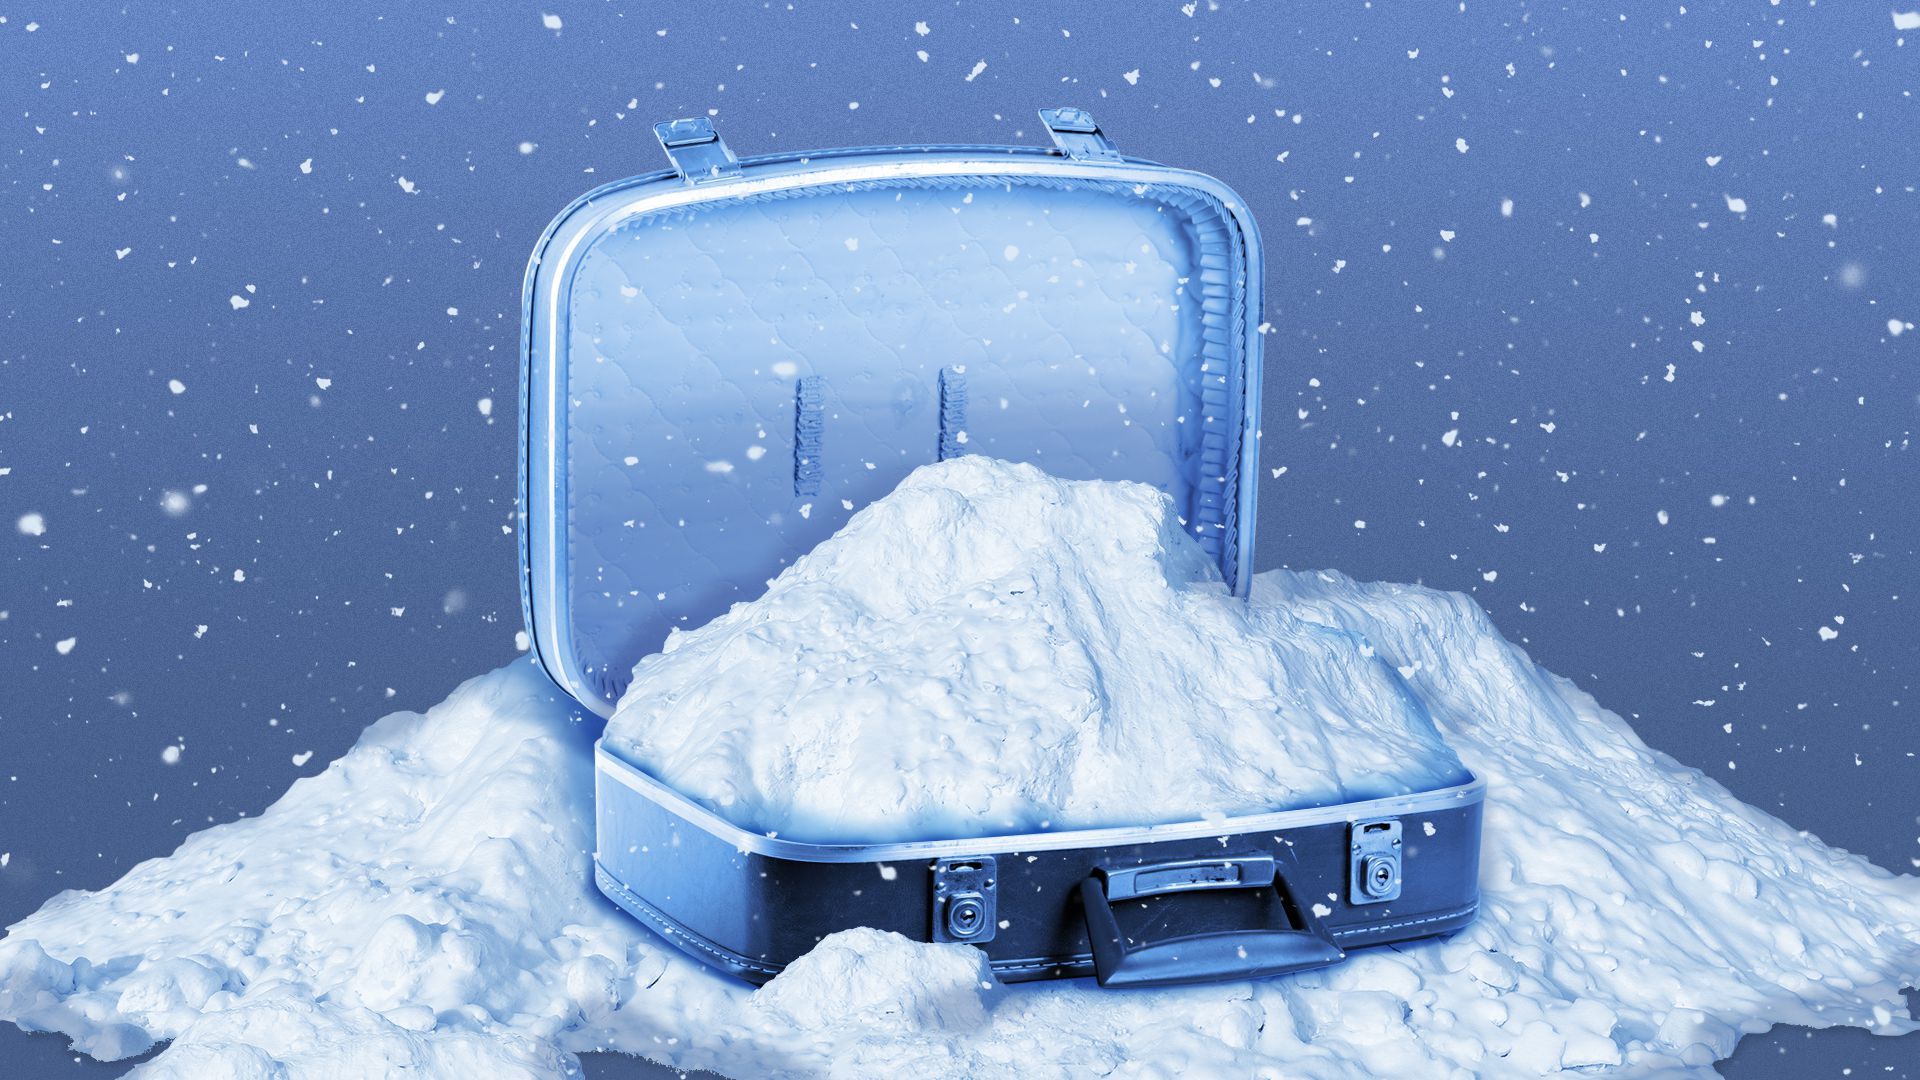 Illustration of a blue suitcase in a pile of snow